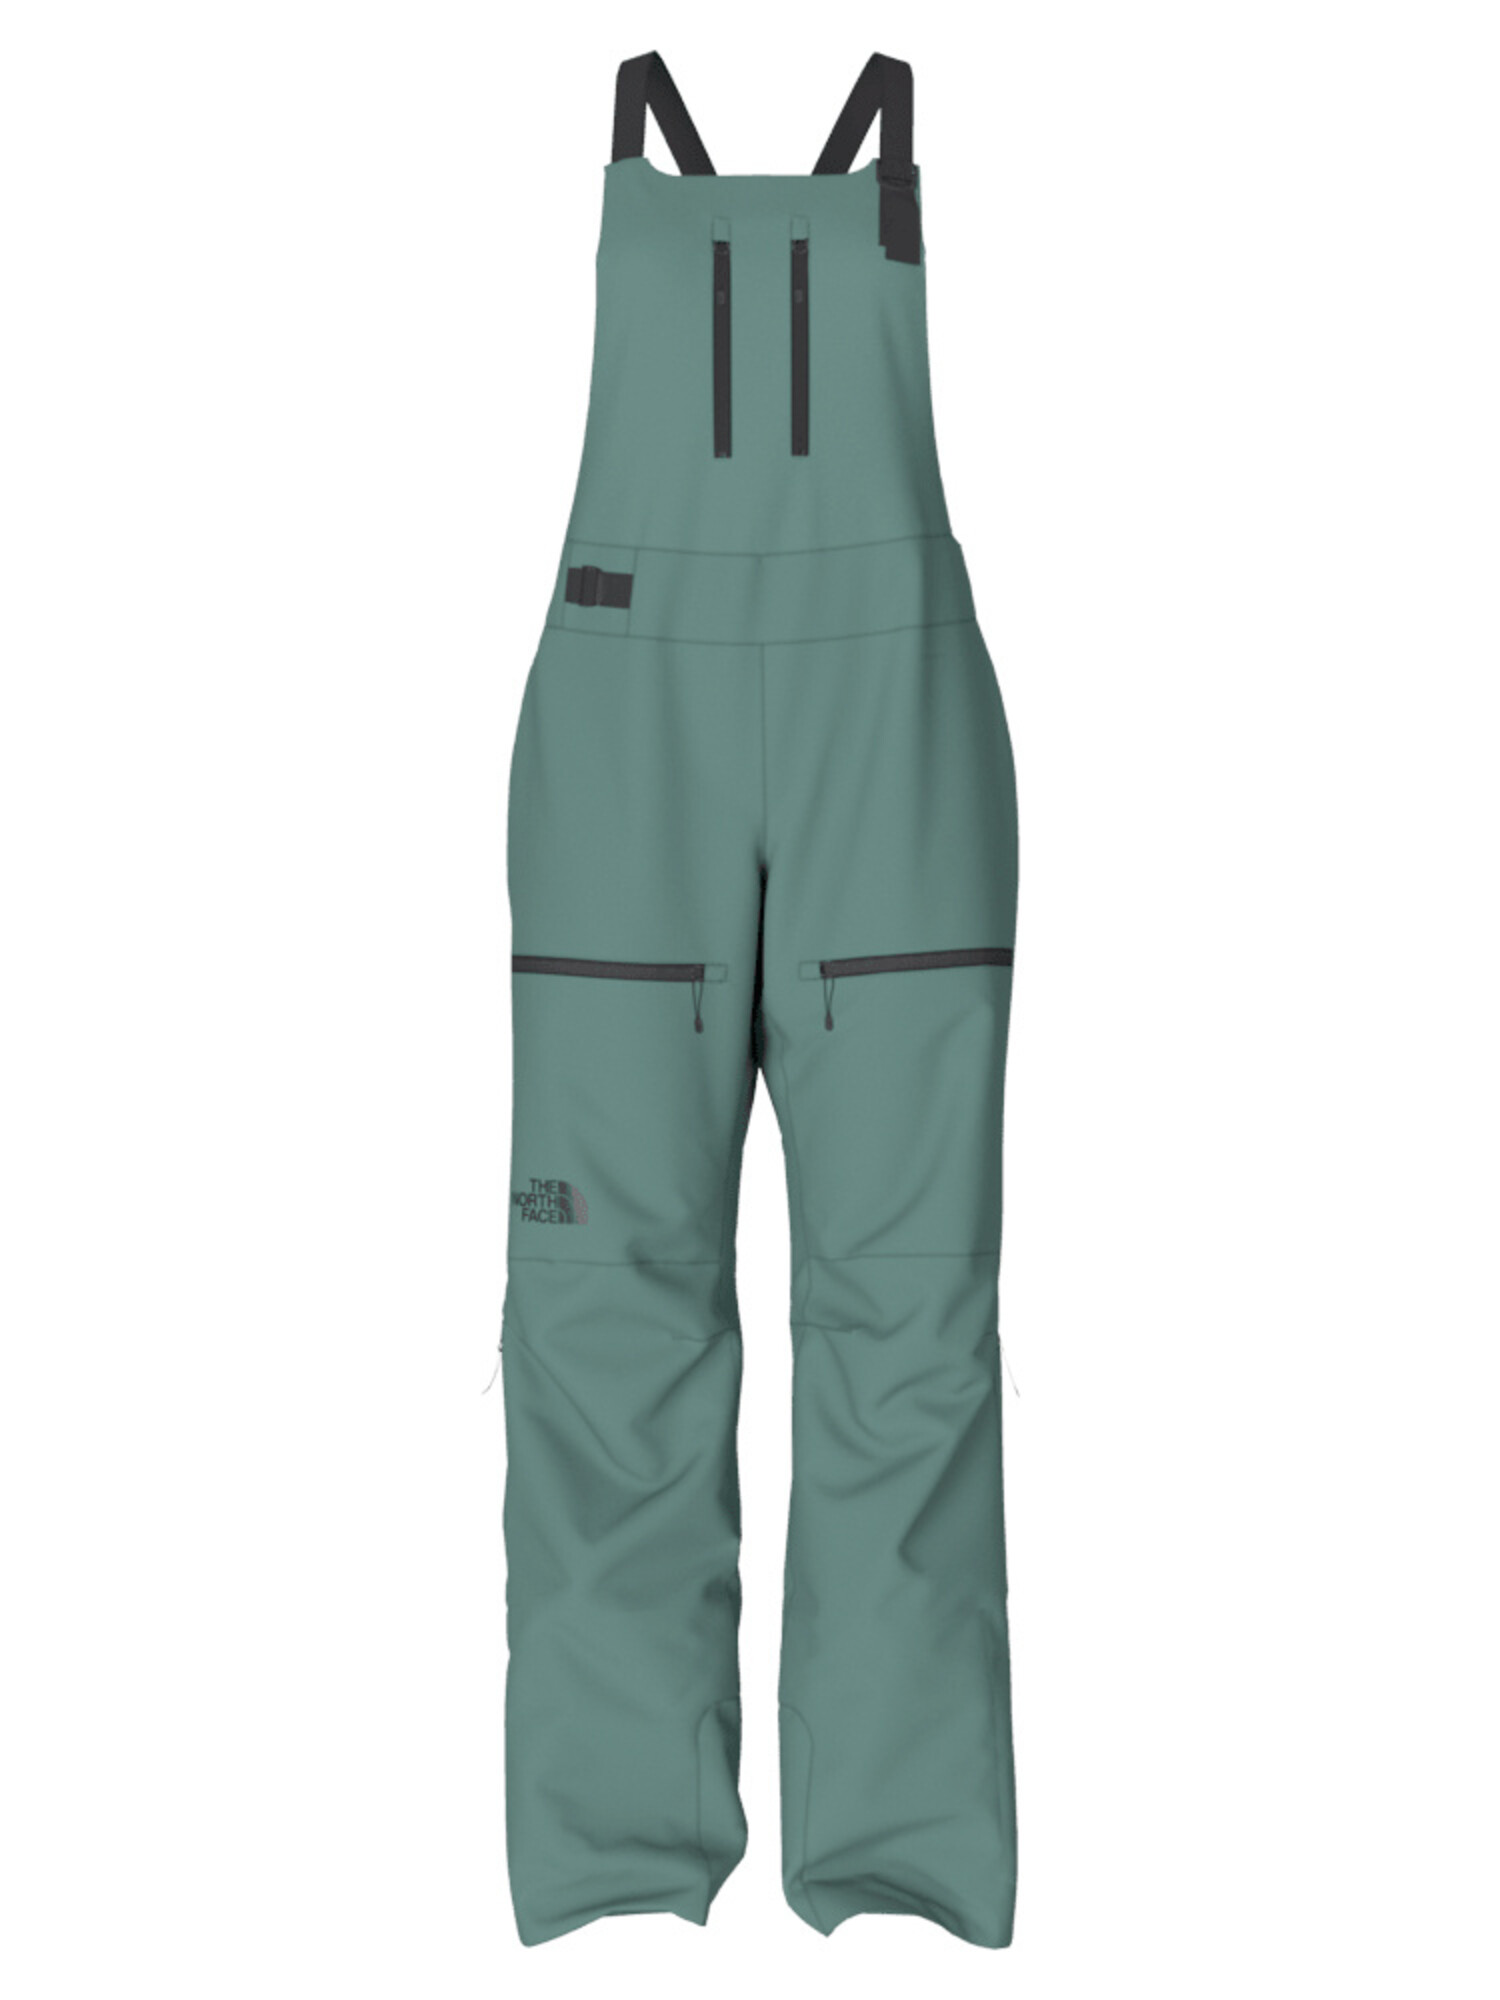 The North Face The North Face Summit Ceptor Bib Pant - Women's